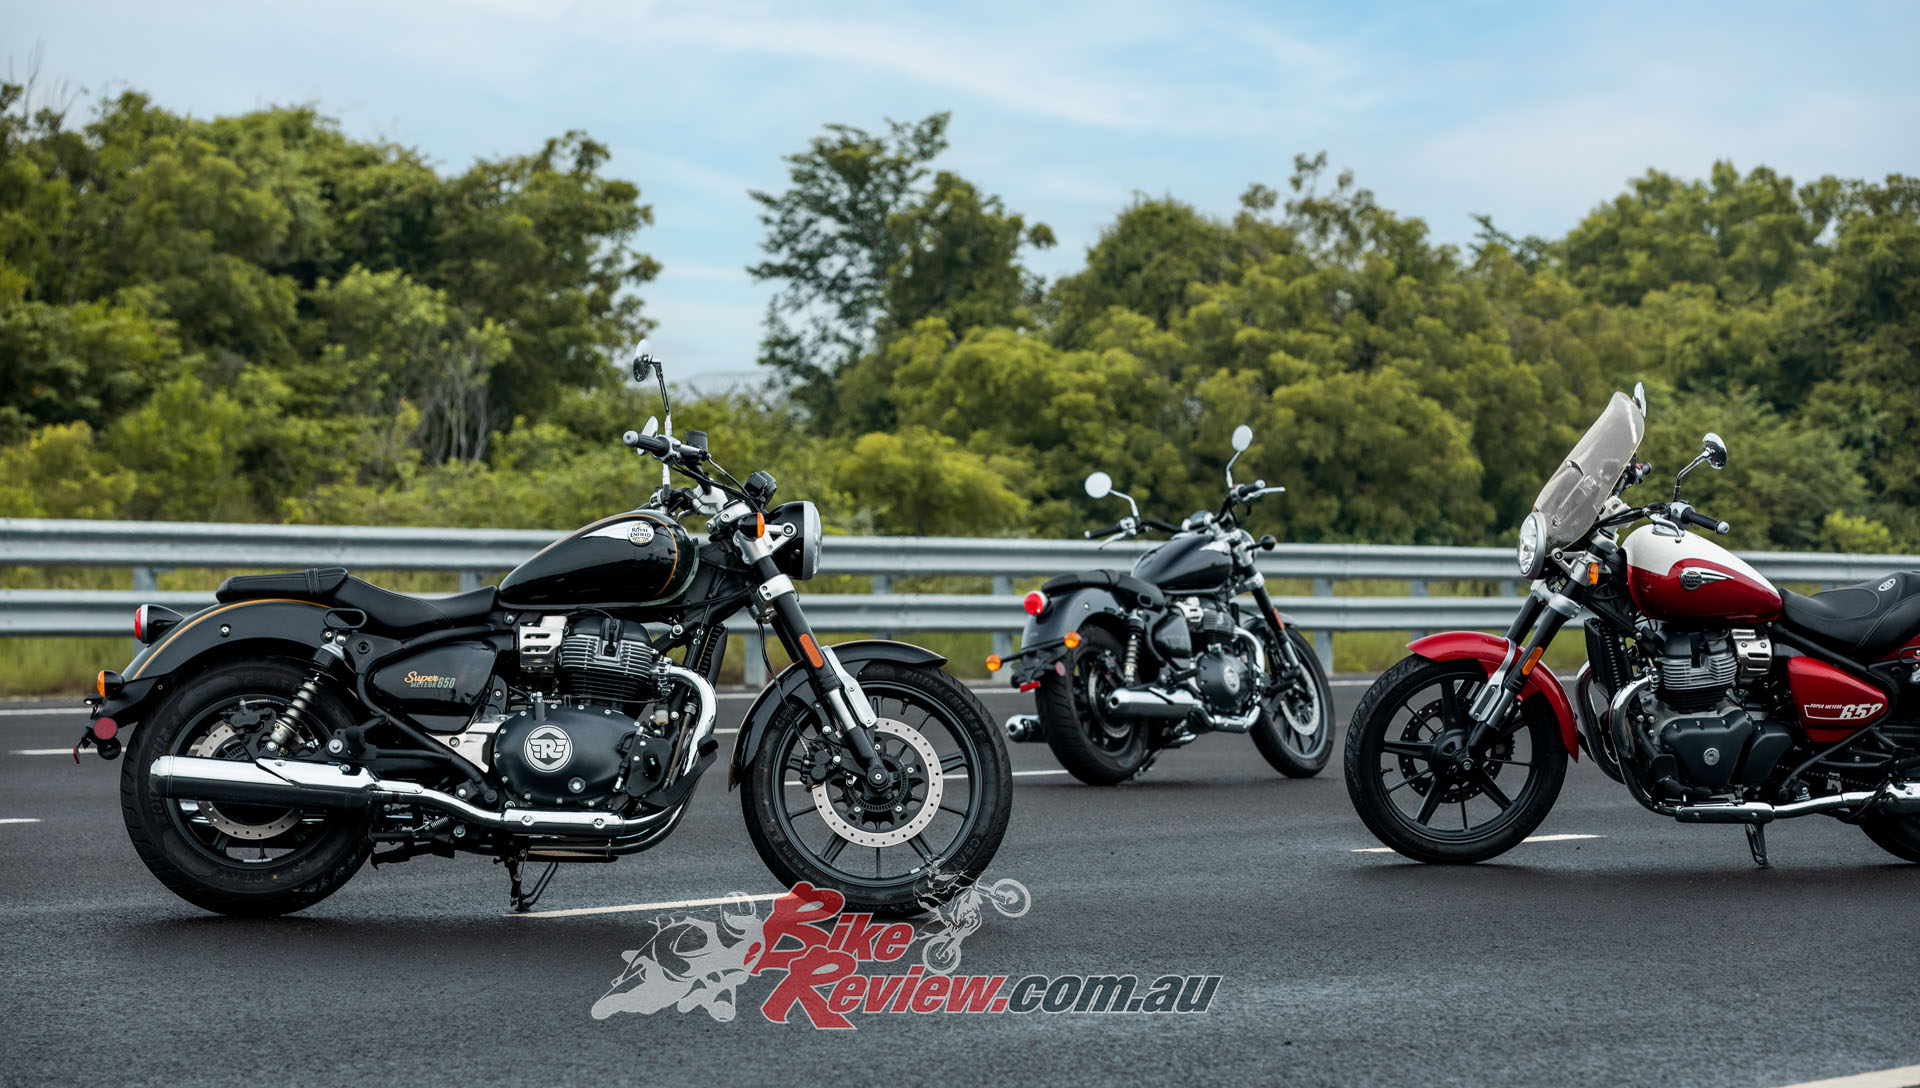 Royal Enfield unveiled the new Super Meteor 650 at ECIMA 2023. Check out the latest creation from the historic brand...